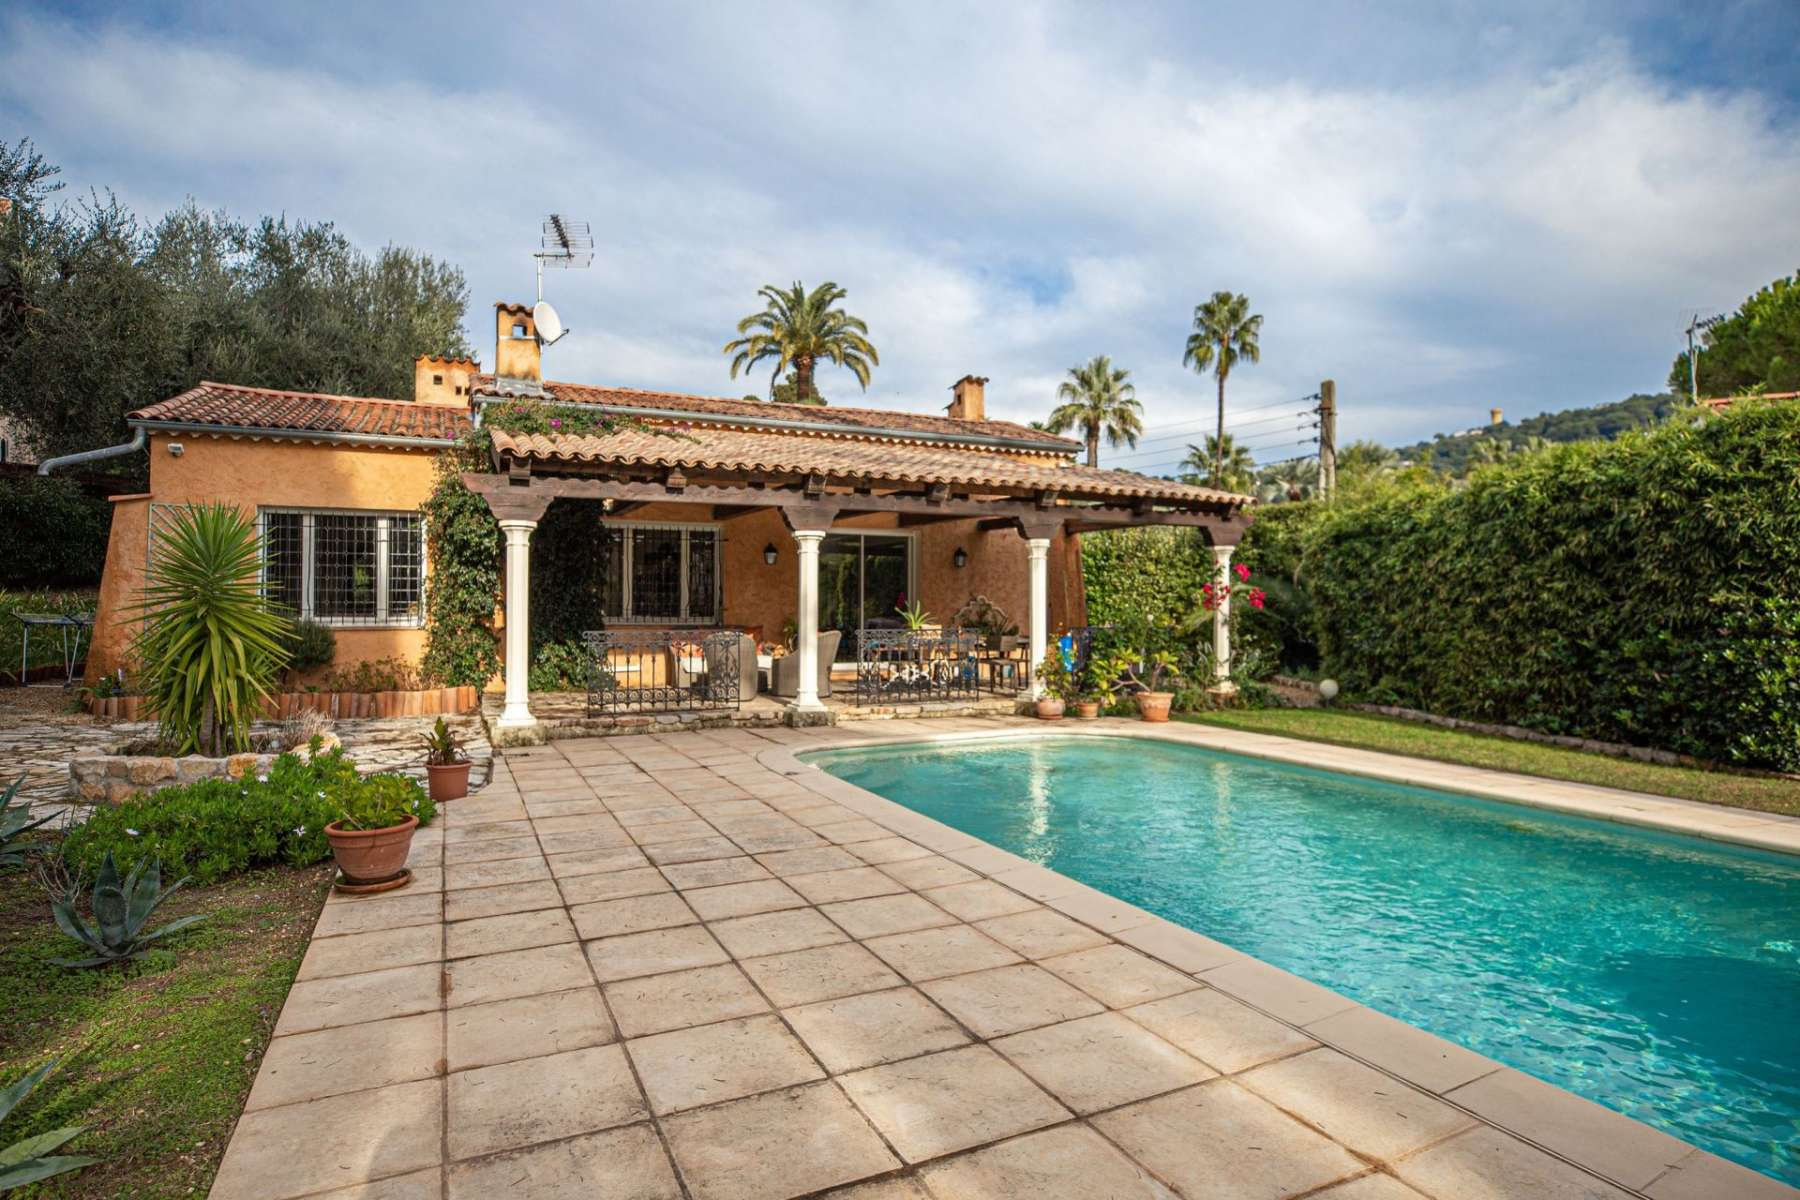 Provencal-style home in Cannes walking distance of Croisette Boulevard